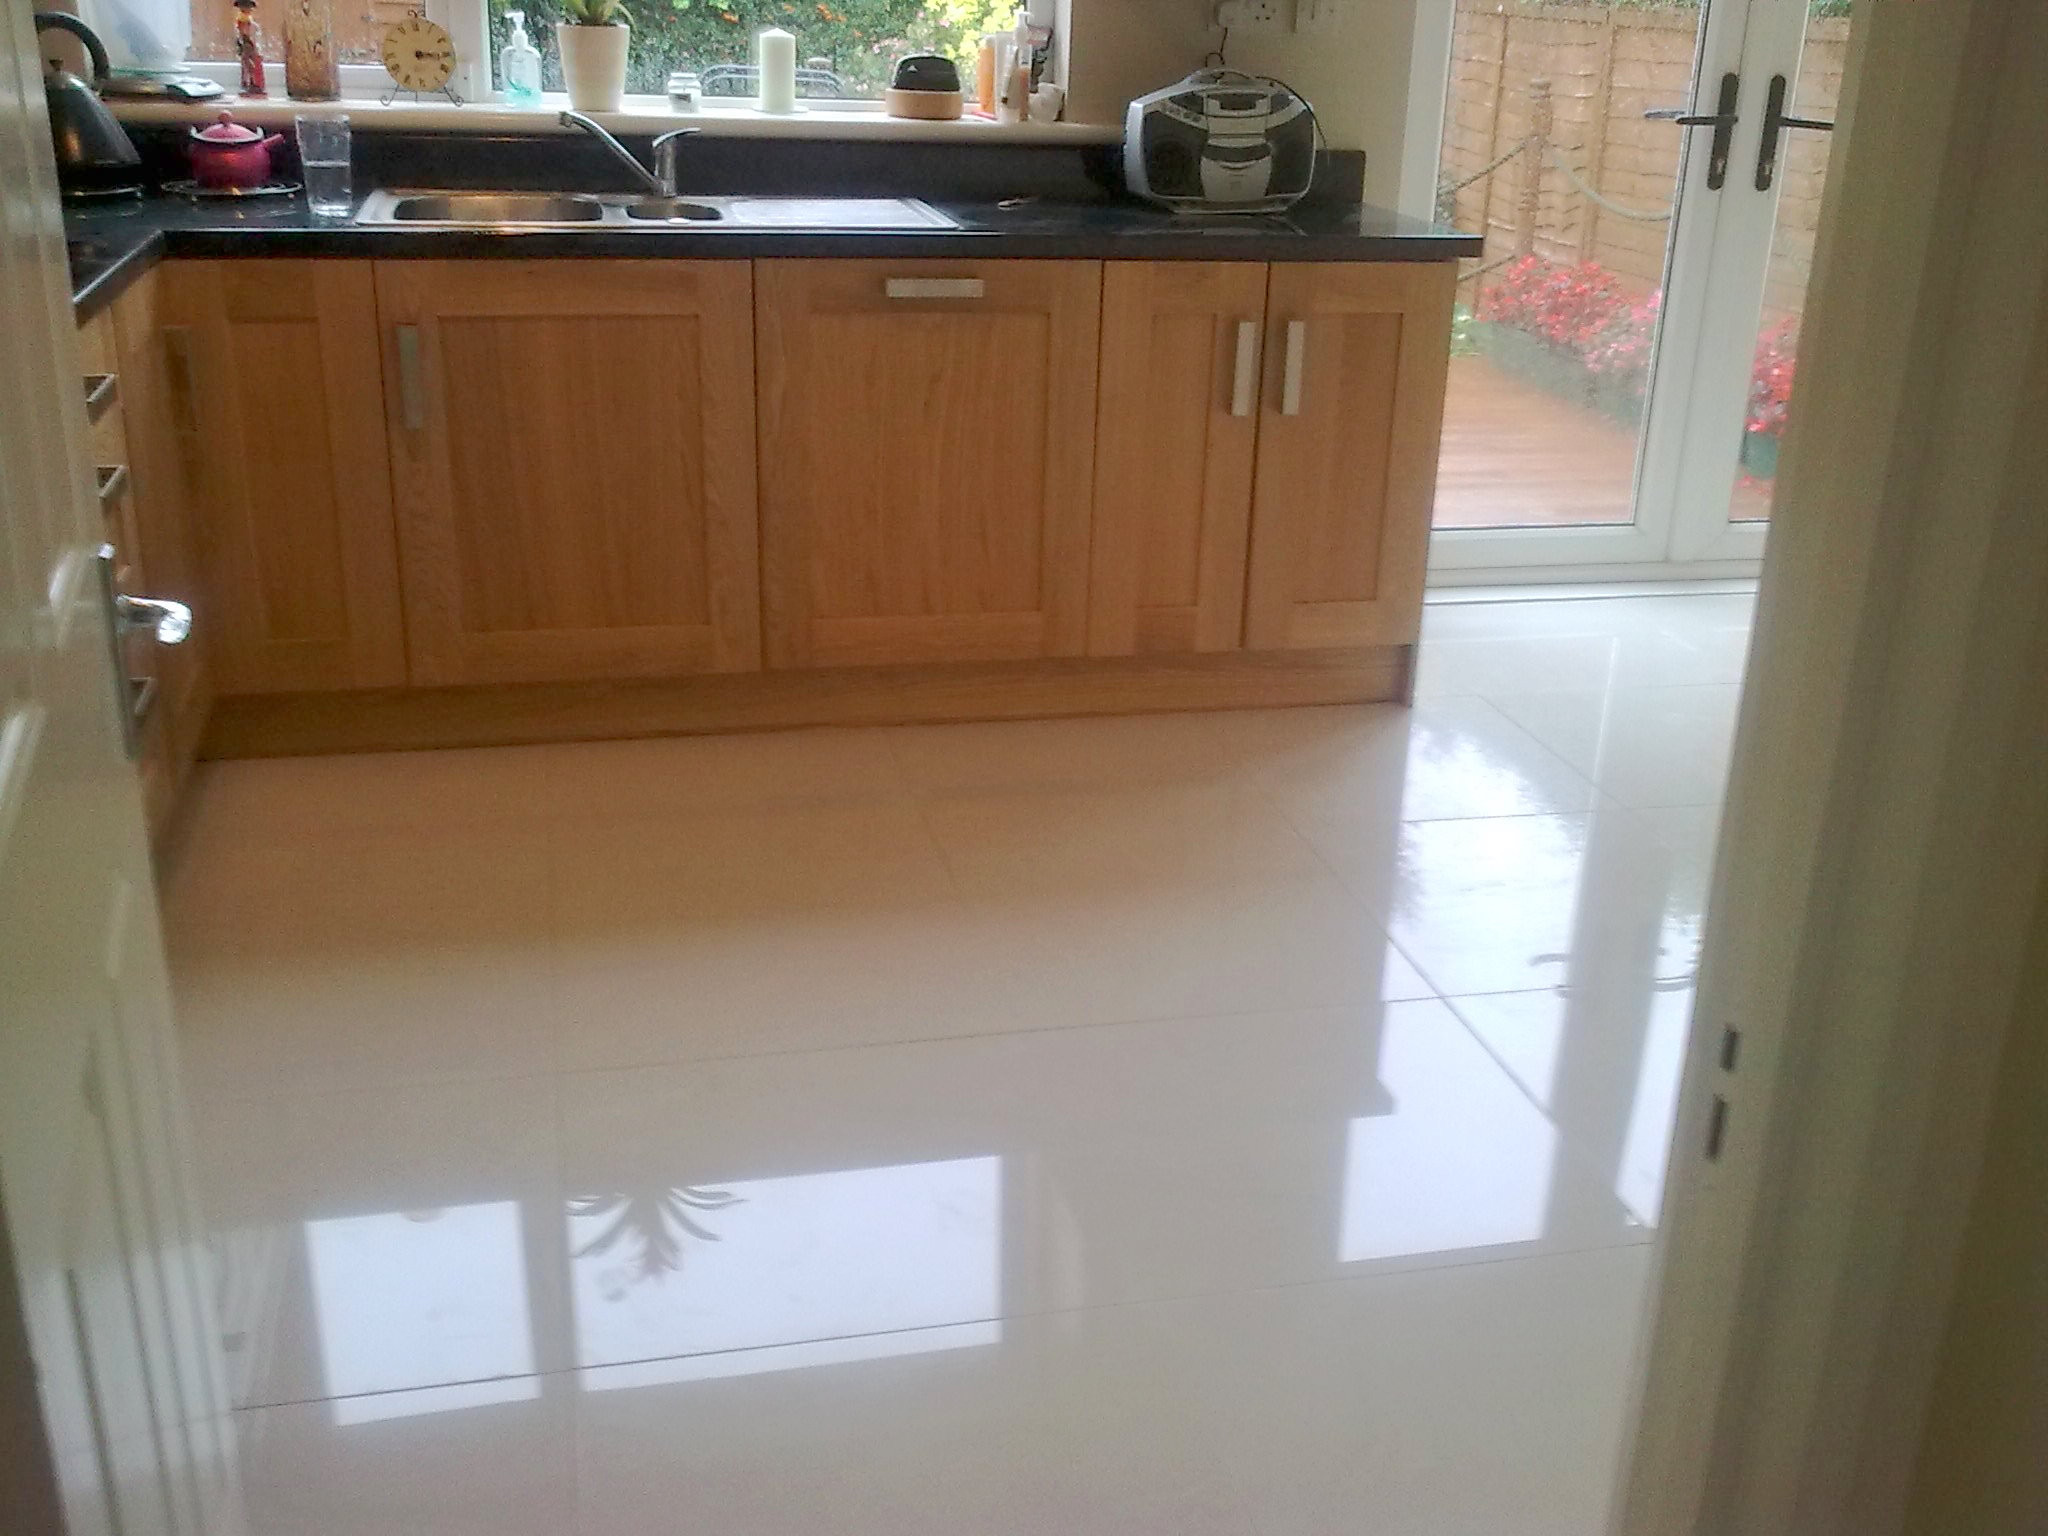 Porcelain Tiles Kitchen Floor
 Best Kitchen Flooring Material Options The Pros And Cons